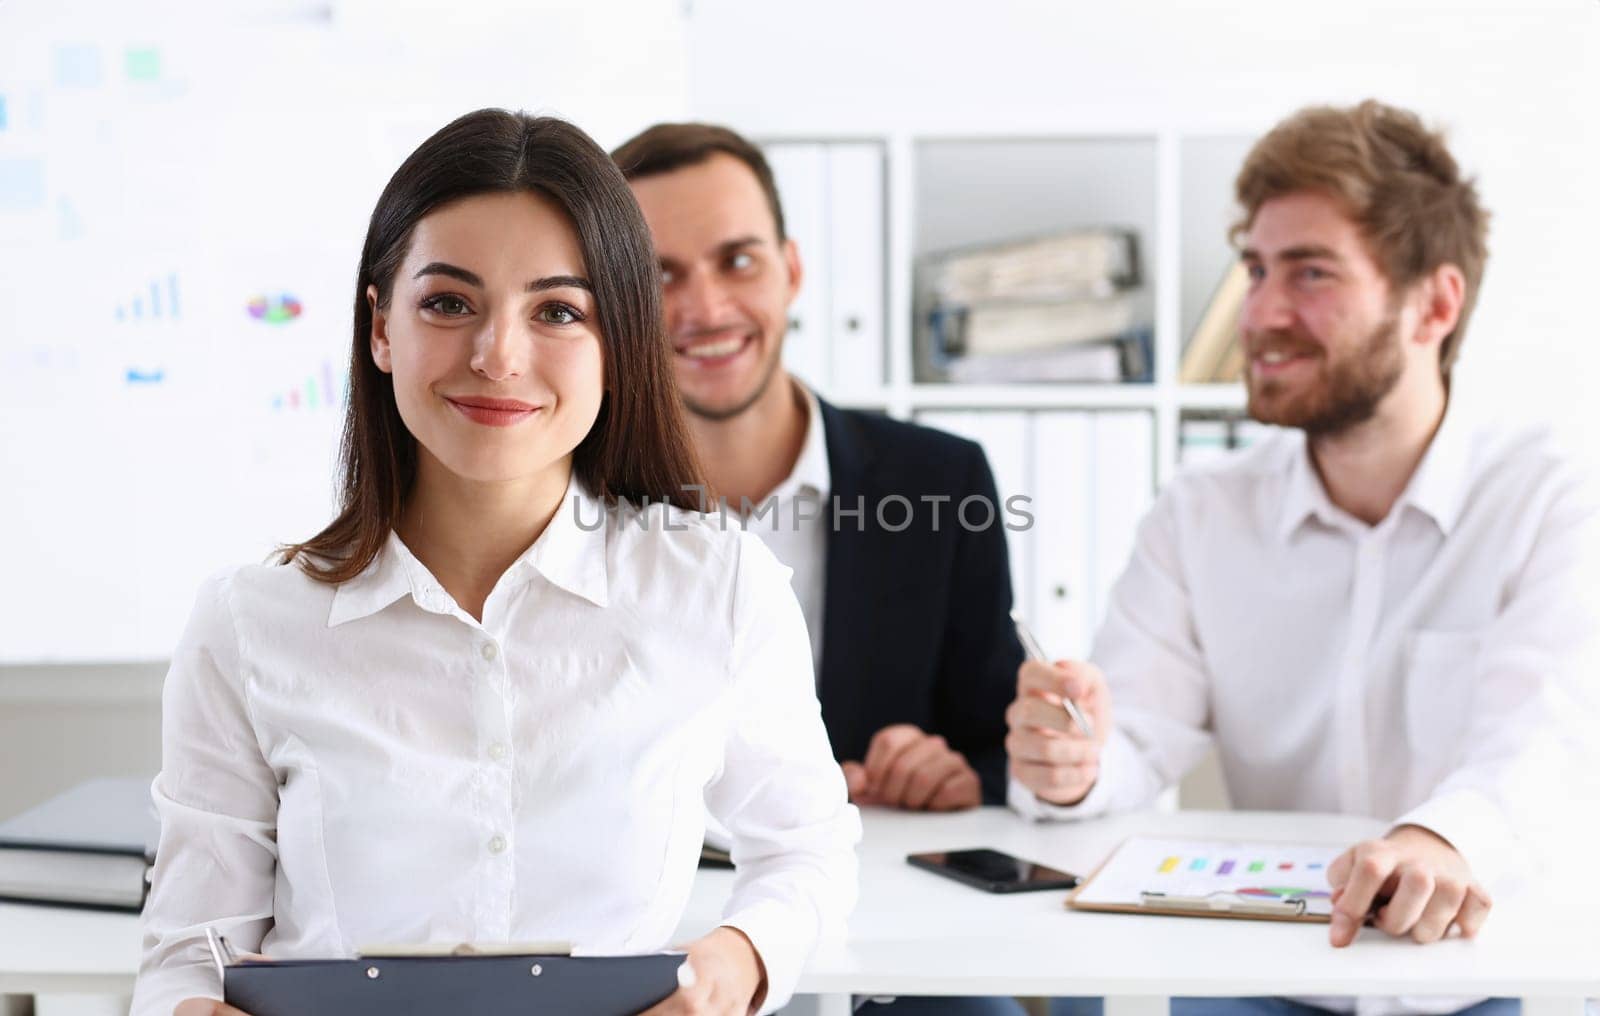 Beautiful smiling cheerful girl at workplace look by kuprevich